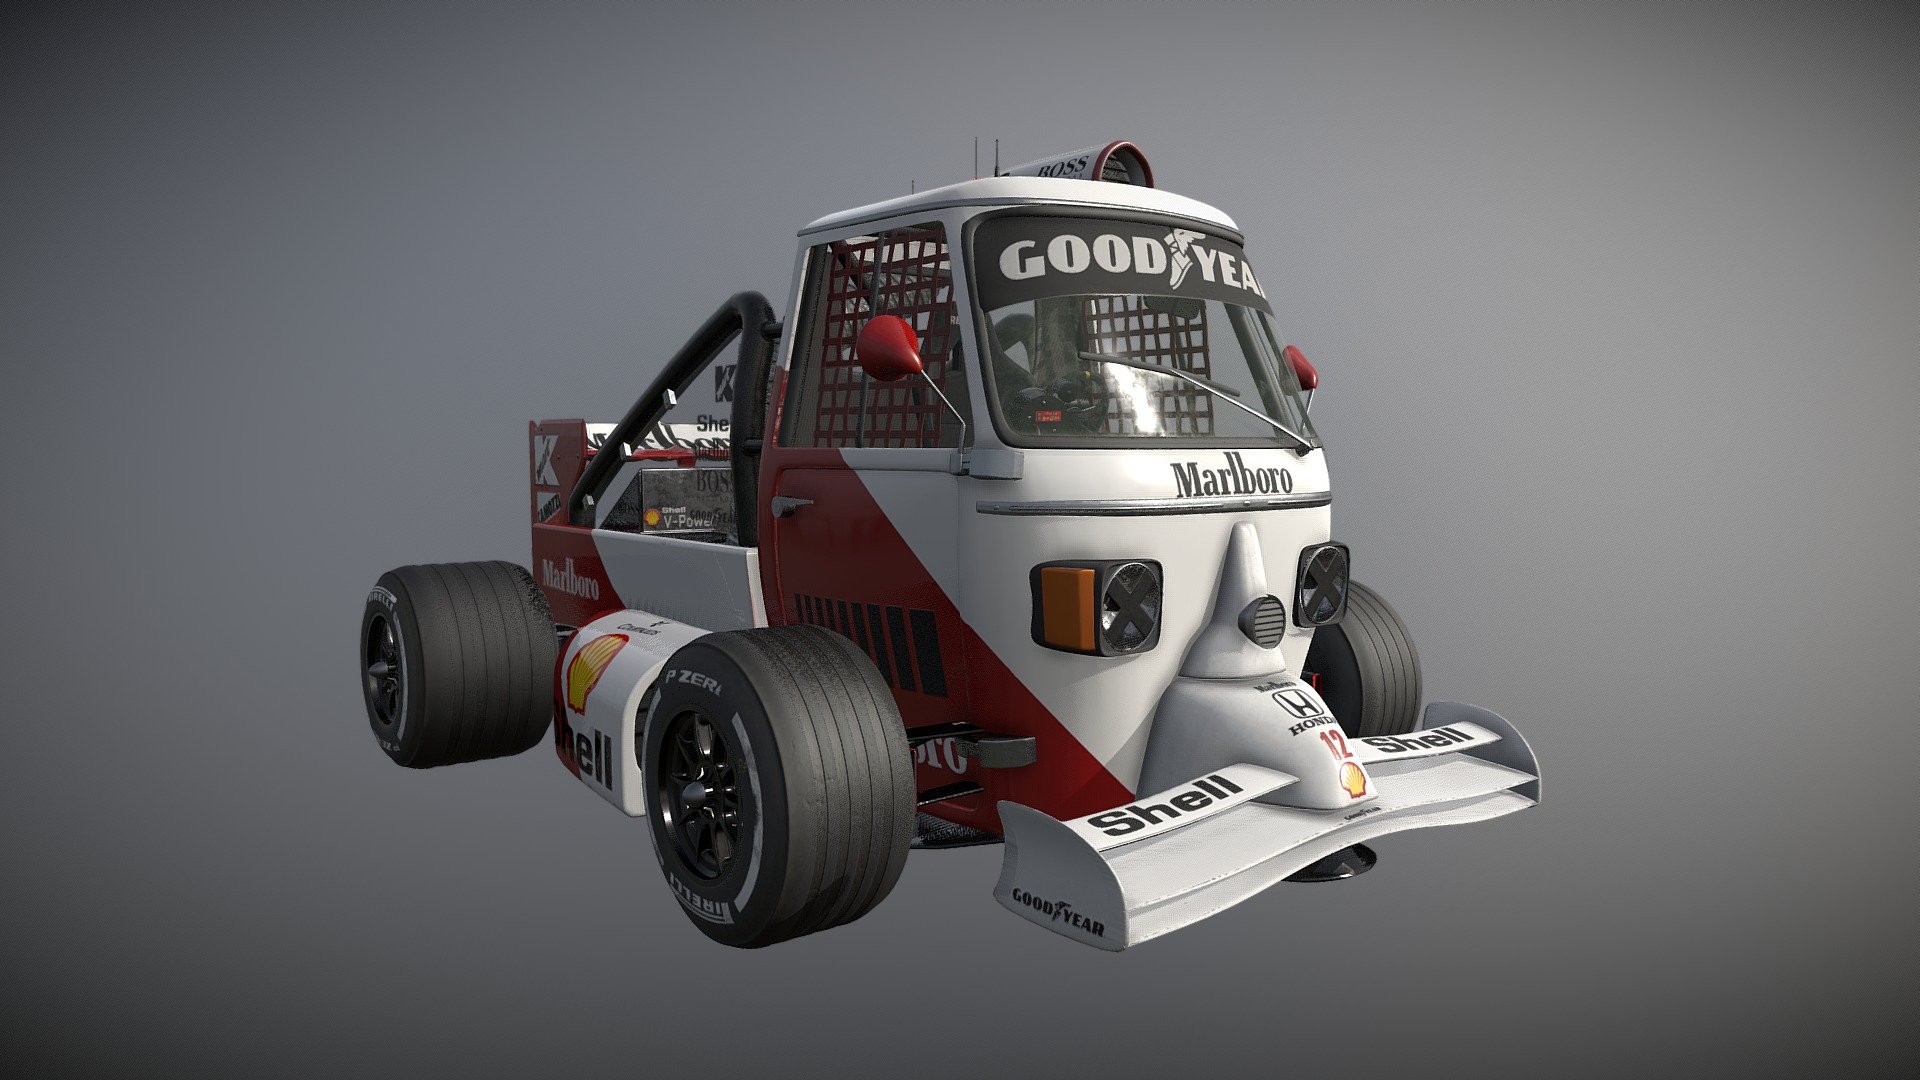 Just a silly idea I had. Thought it would be fun to see it in 3D space. Would be a fun mod for any racing game if you want to have a laugh 3d model